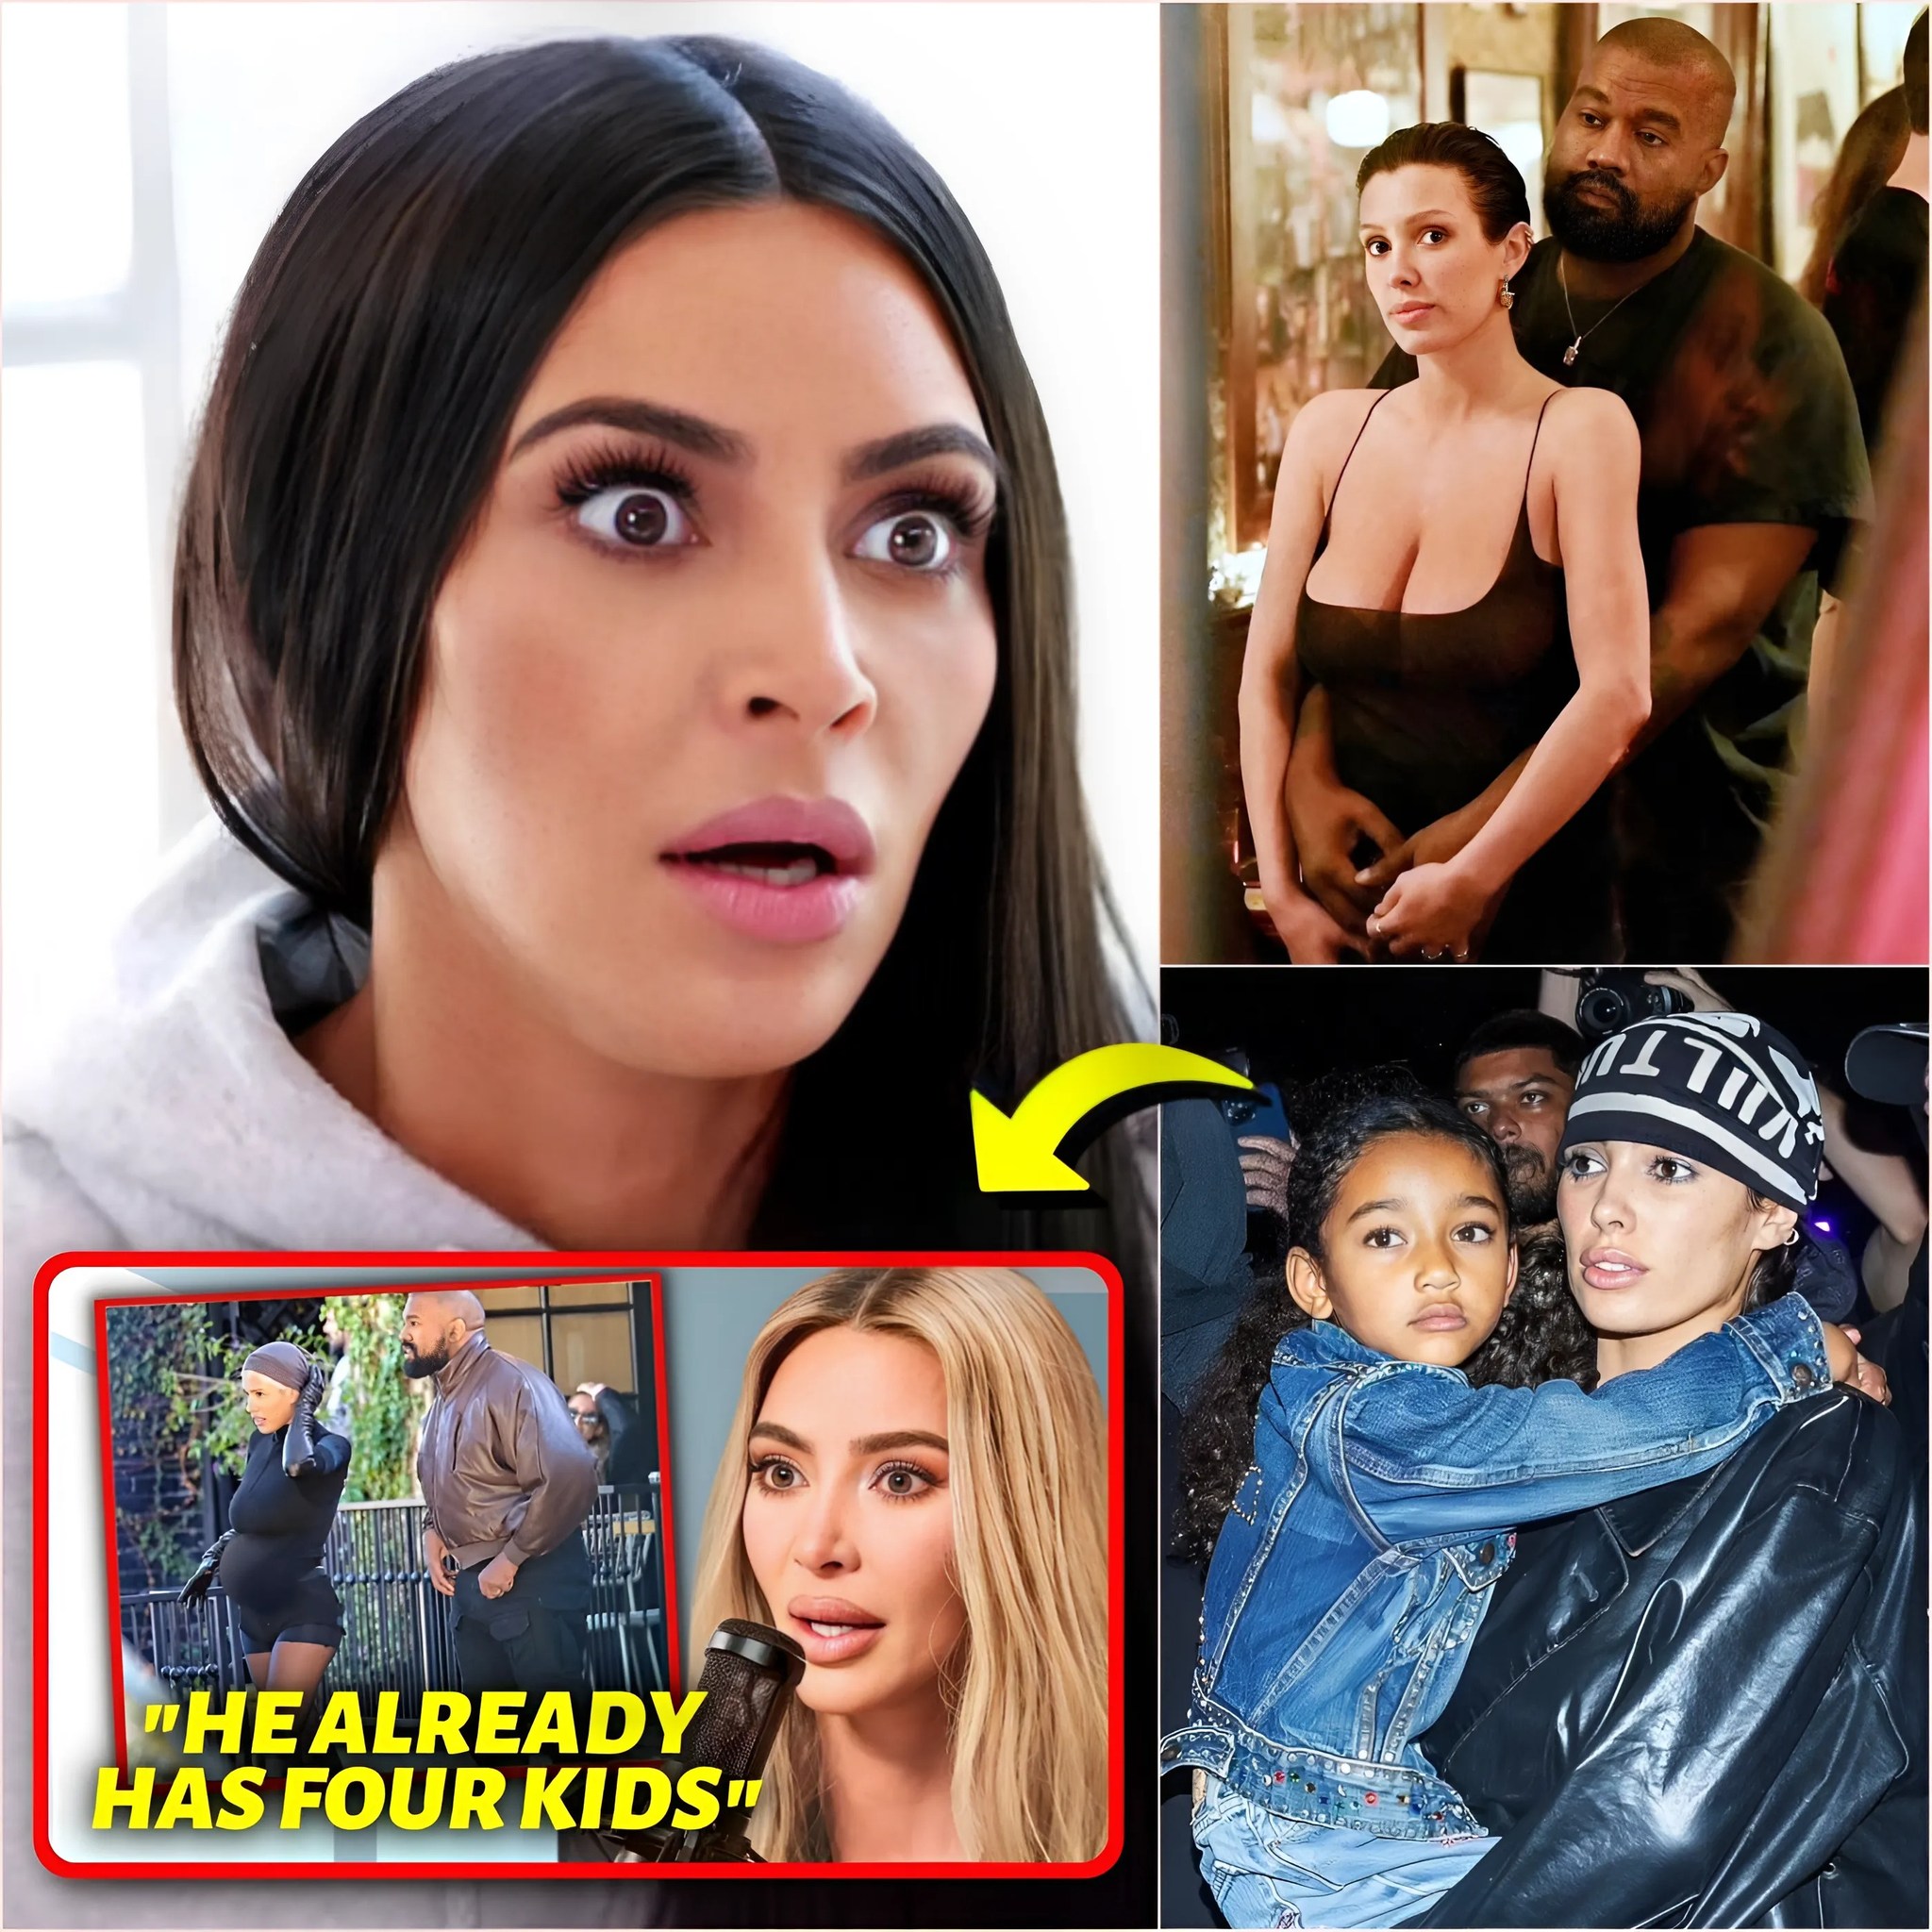 Kim K Breaks Down Over Bianca Getting Pregnant With Kanye | A Sh3cking Revelation